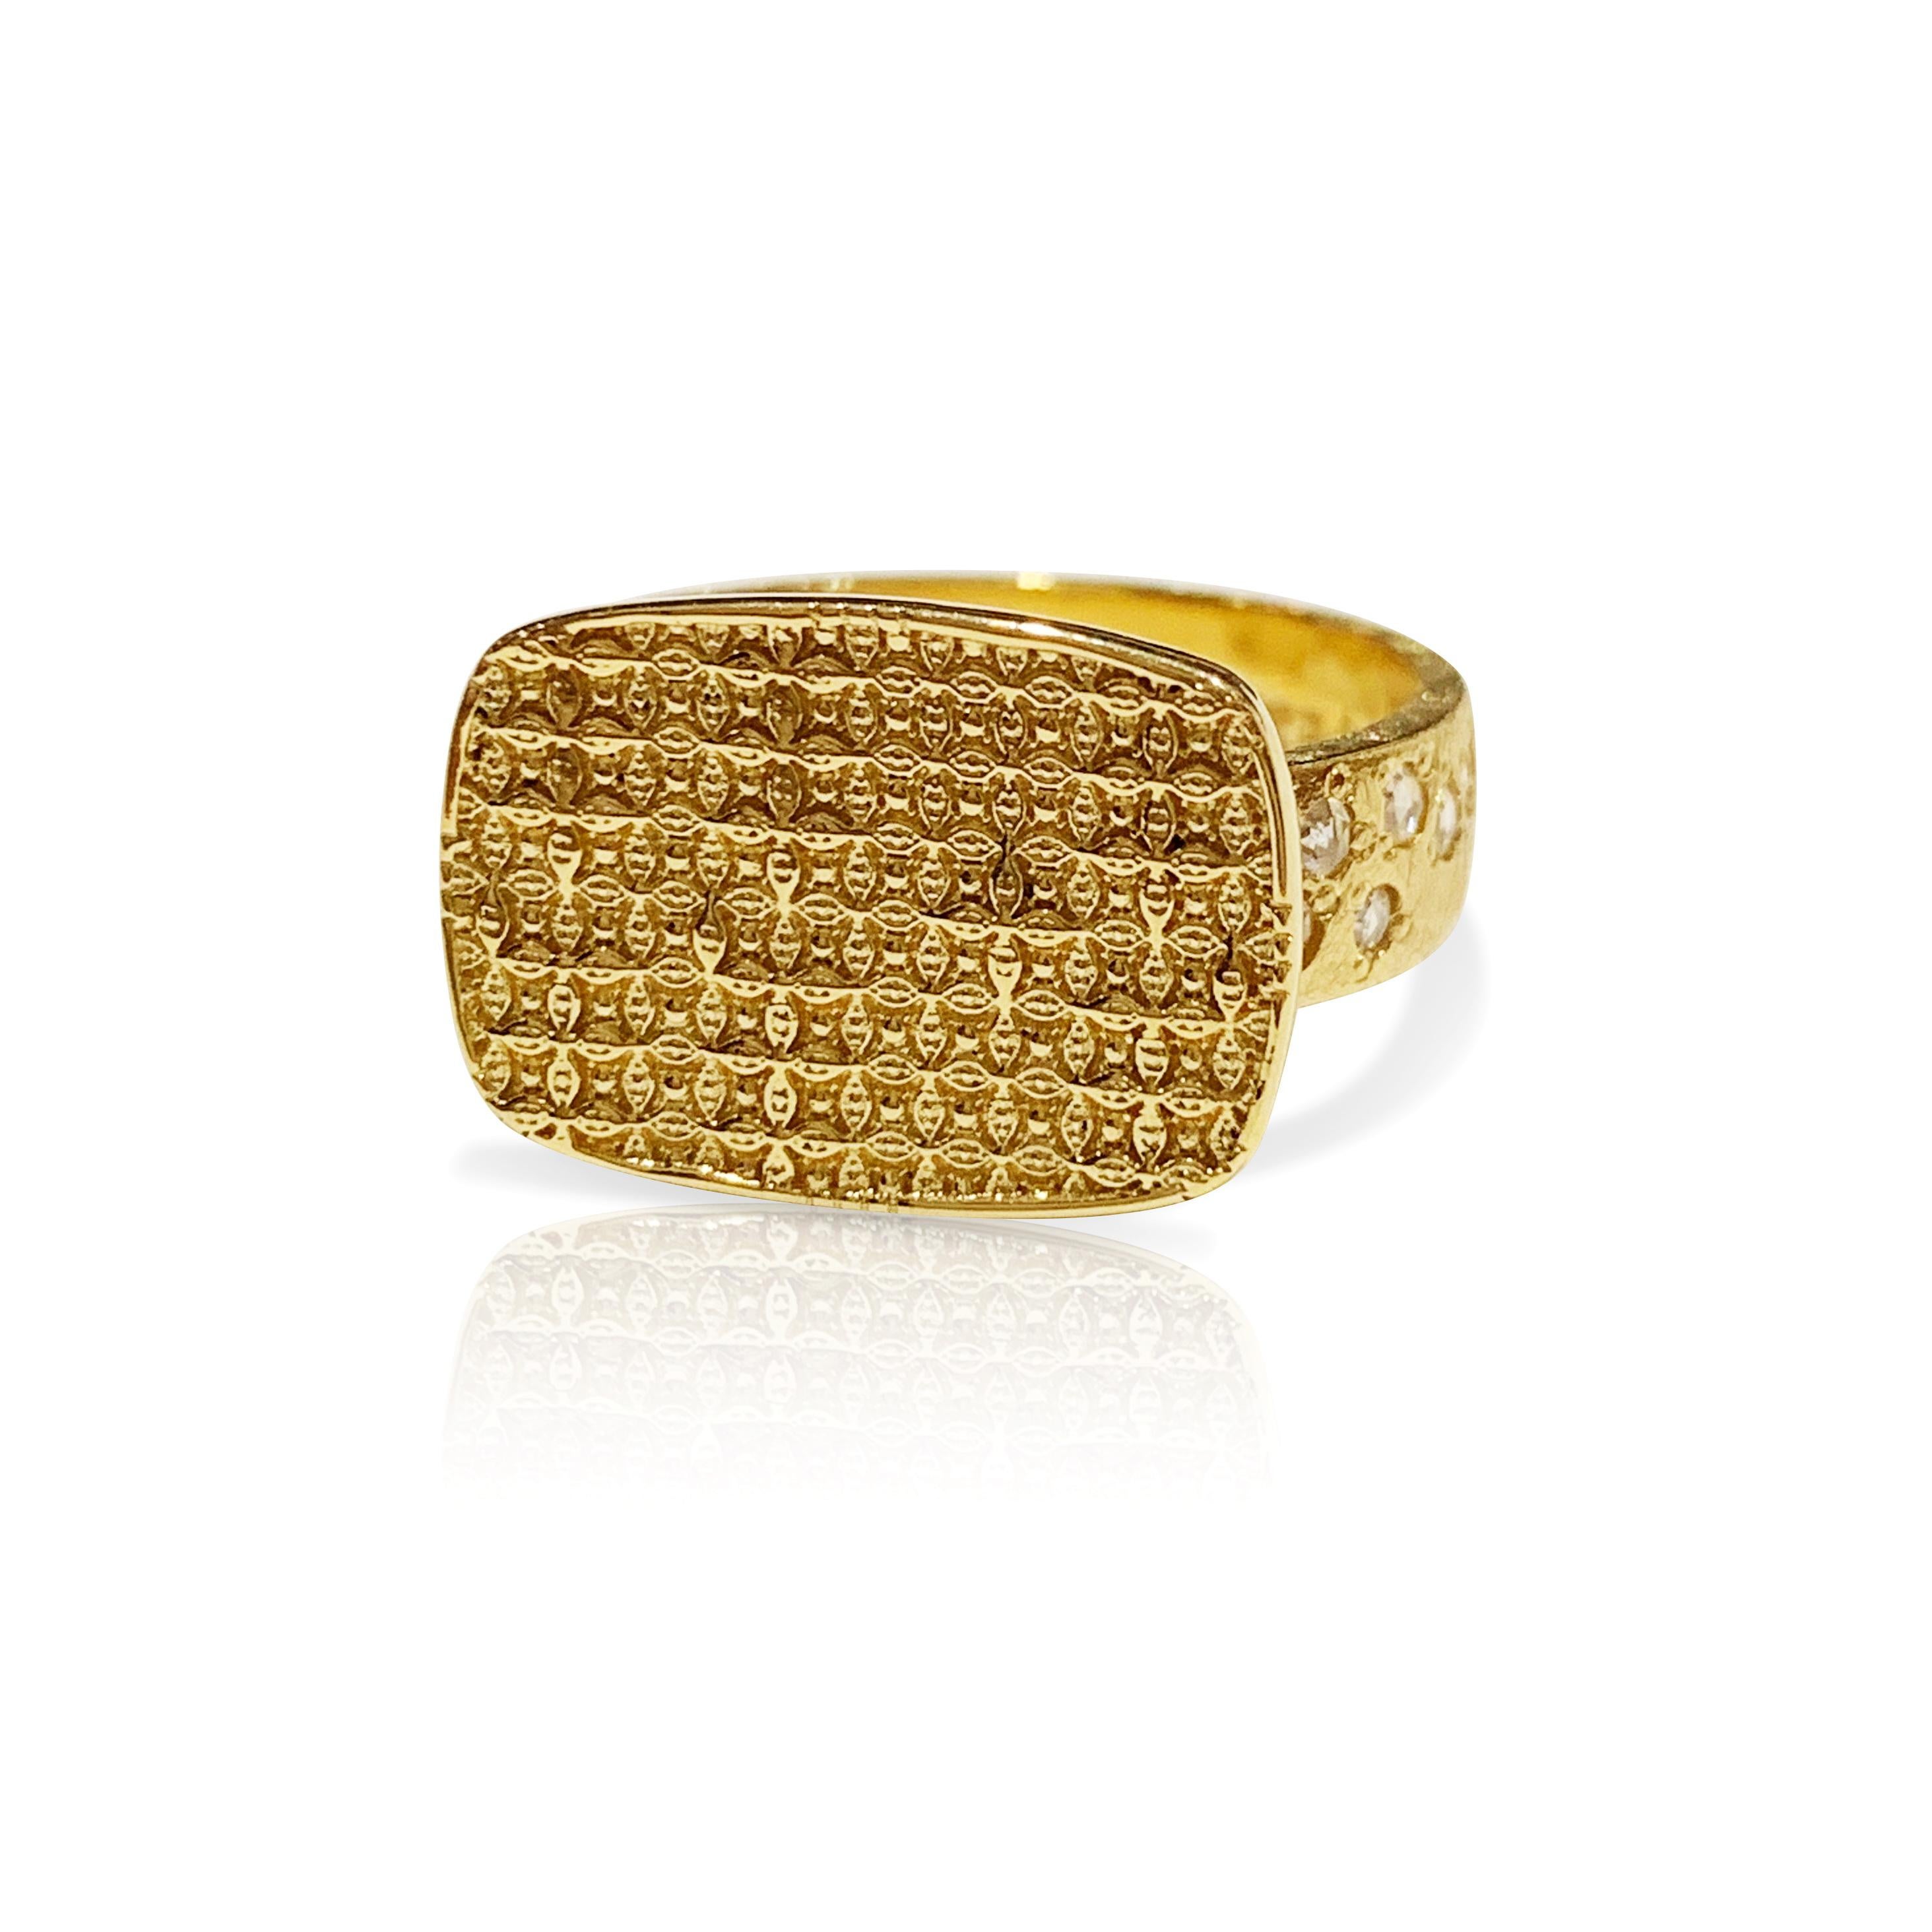 Luca Jouel Rose Cut Diamond Antique Patterned Statement Ring in 18 Carat Gold In New Condition For Sale In South Perth, AU